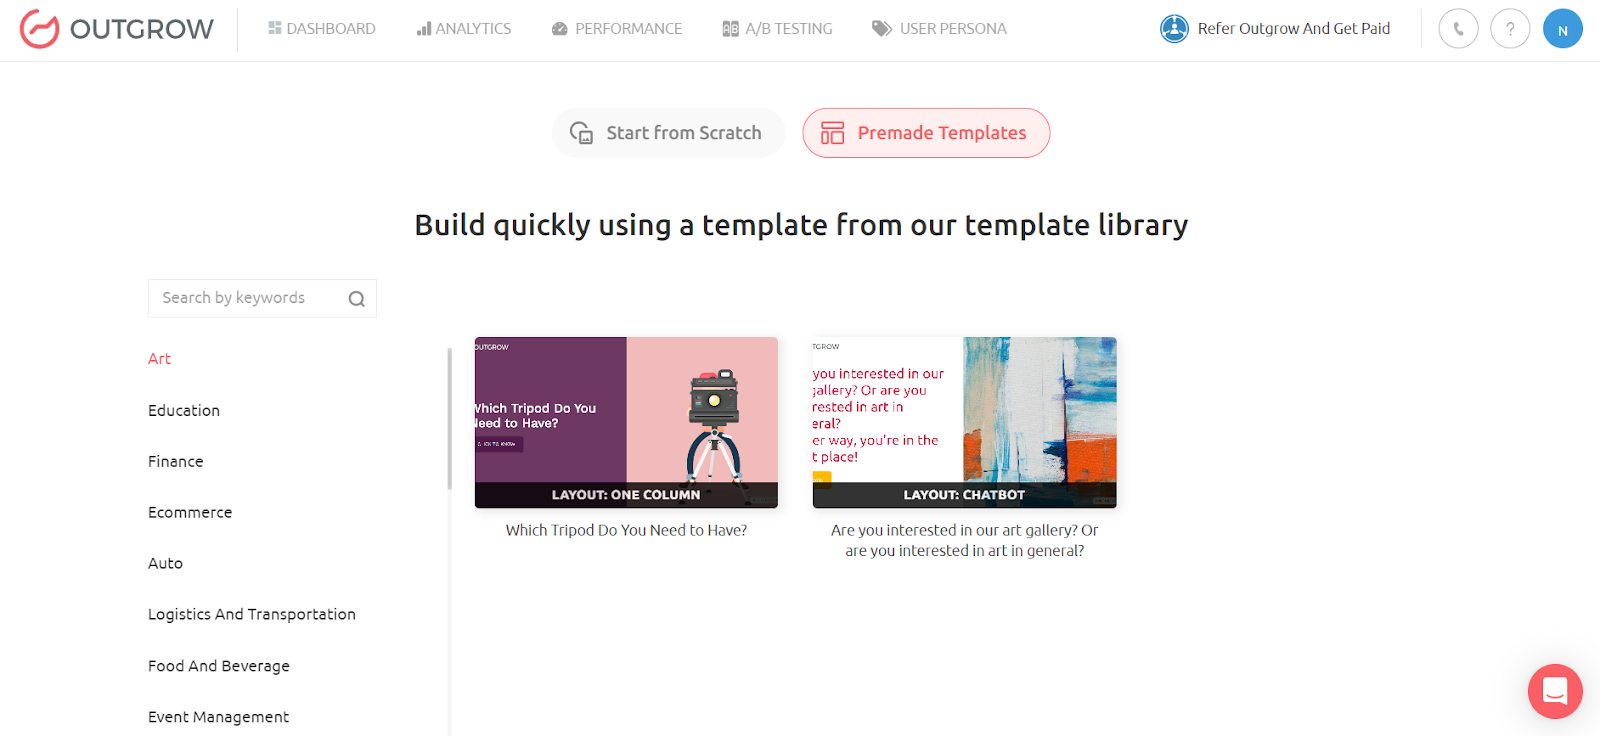 Template selection in Outgrow's dashboard